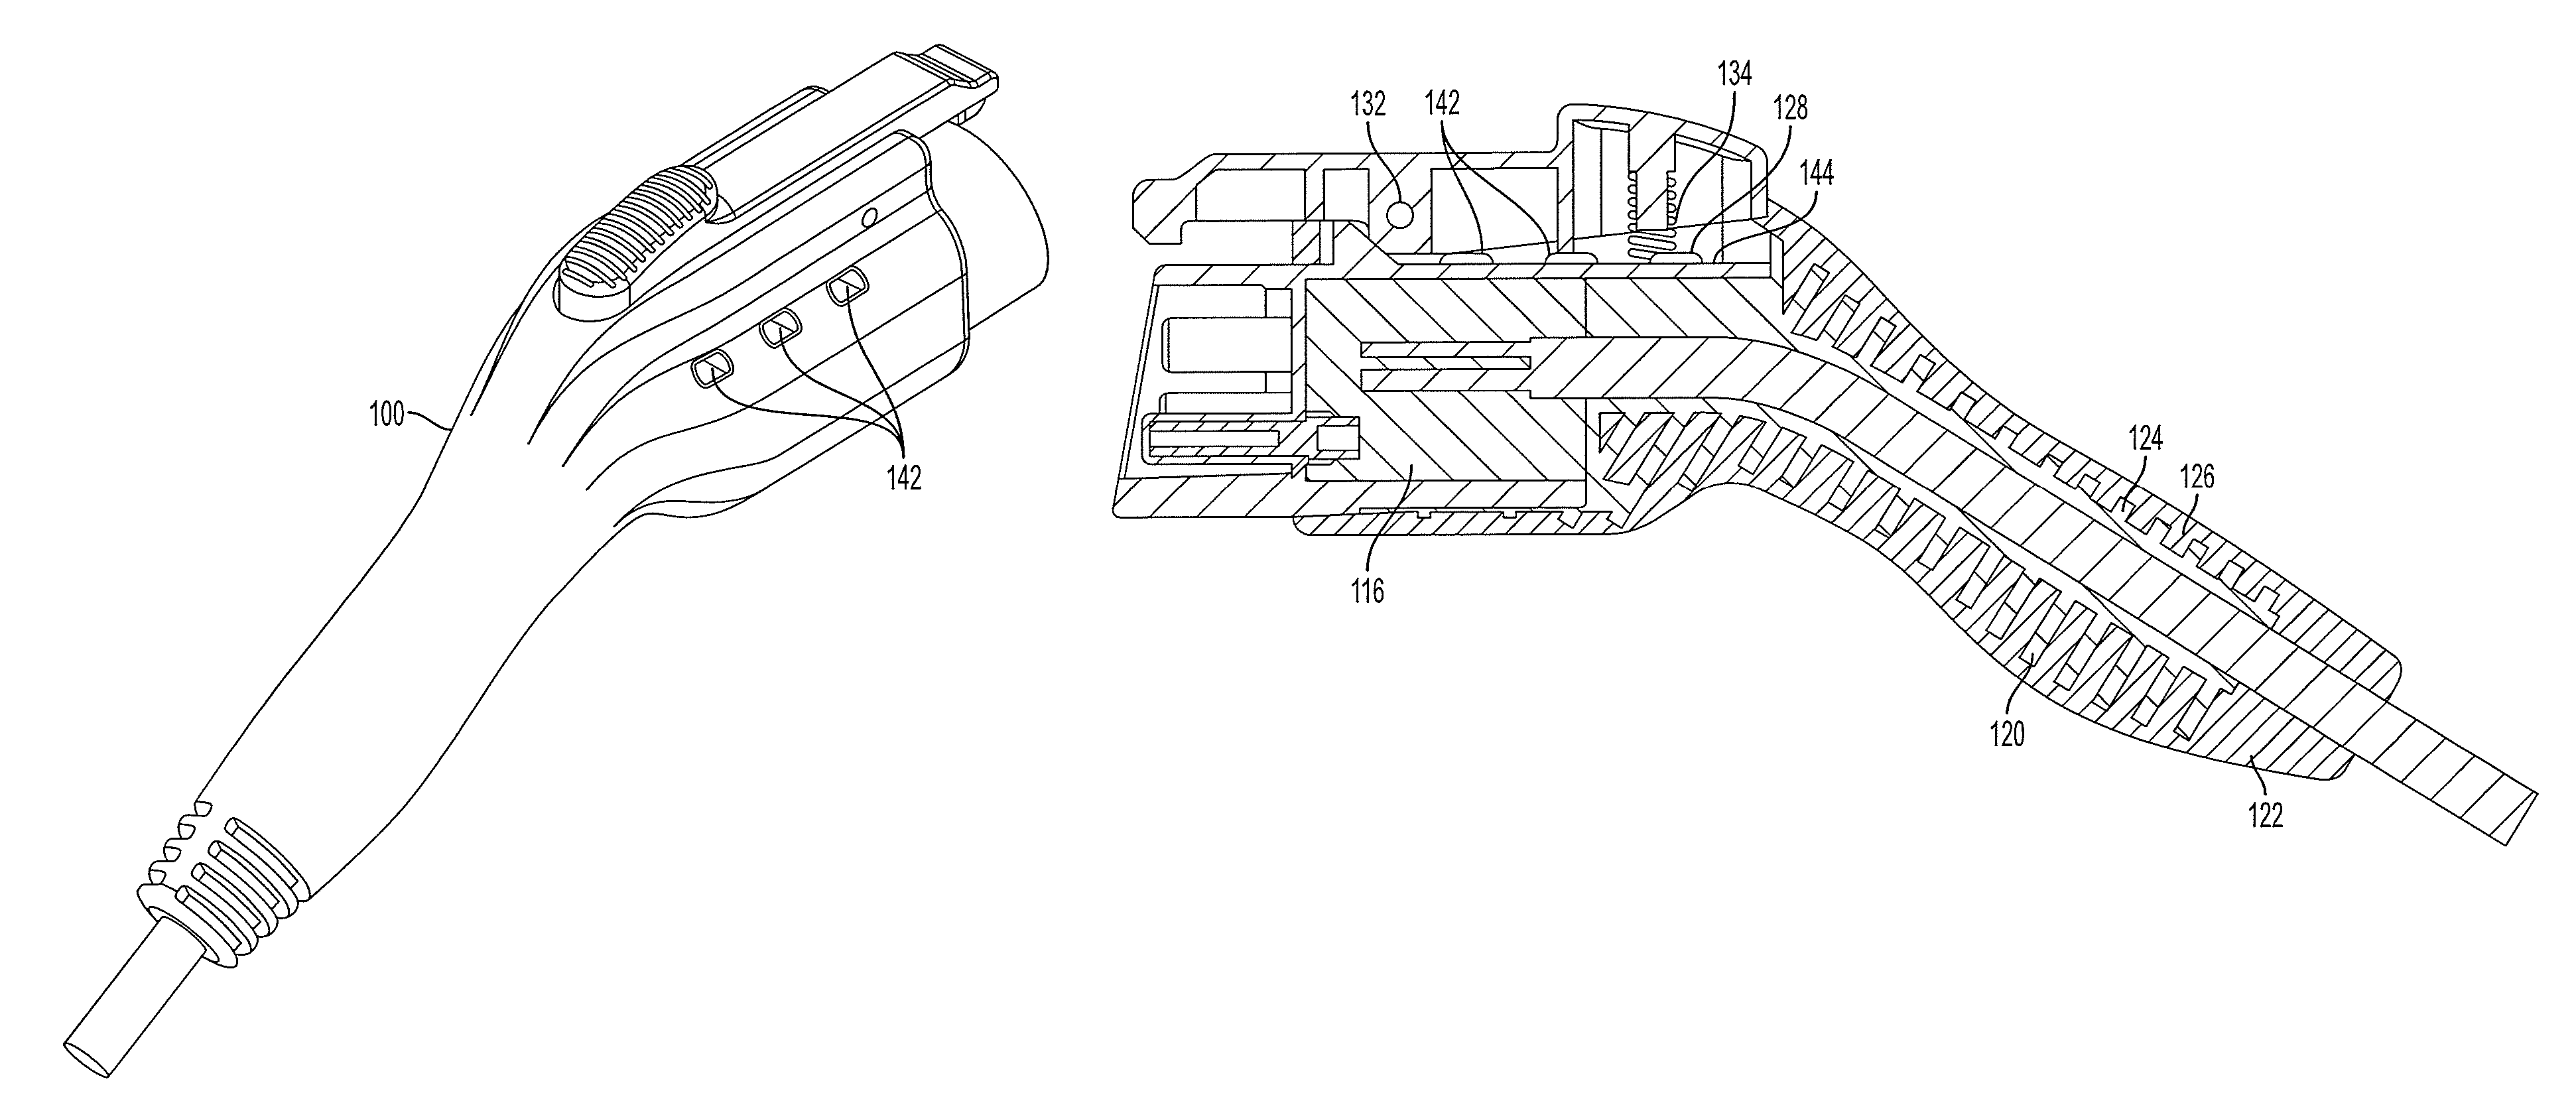 Laminous multi-polymeric high amperage over-molded connector assembly for plug-in hybrid electric vehicle charging